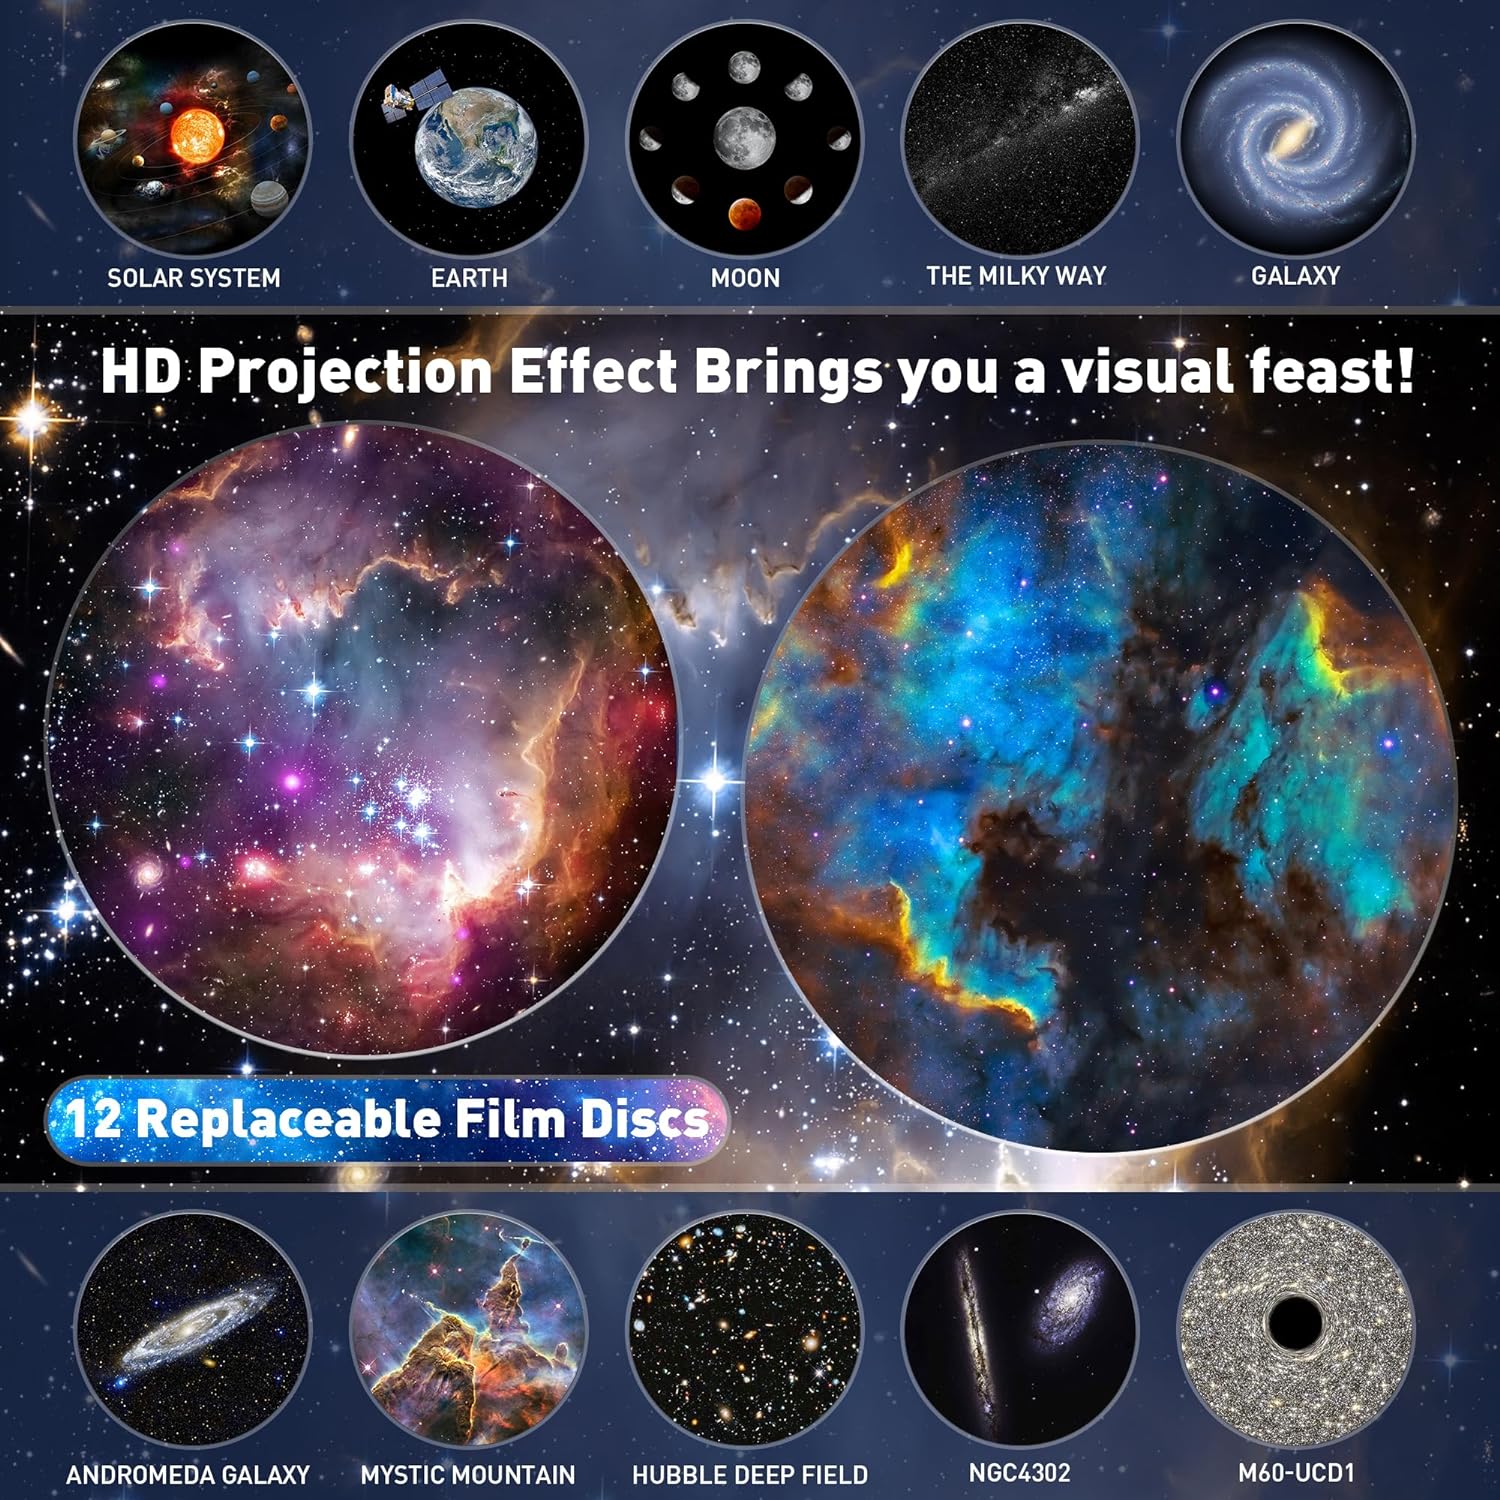 Planetarium Star Projector, Mexllex Realistic Galaxy Light Projector with 12 Planet Discs, Starry Sky Night Light Projector Lamp, Moon Night Light for Kids Adults Ceiling Bedroom Living Room, Party [Energy Class A+] 1